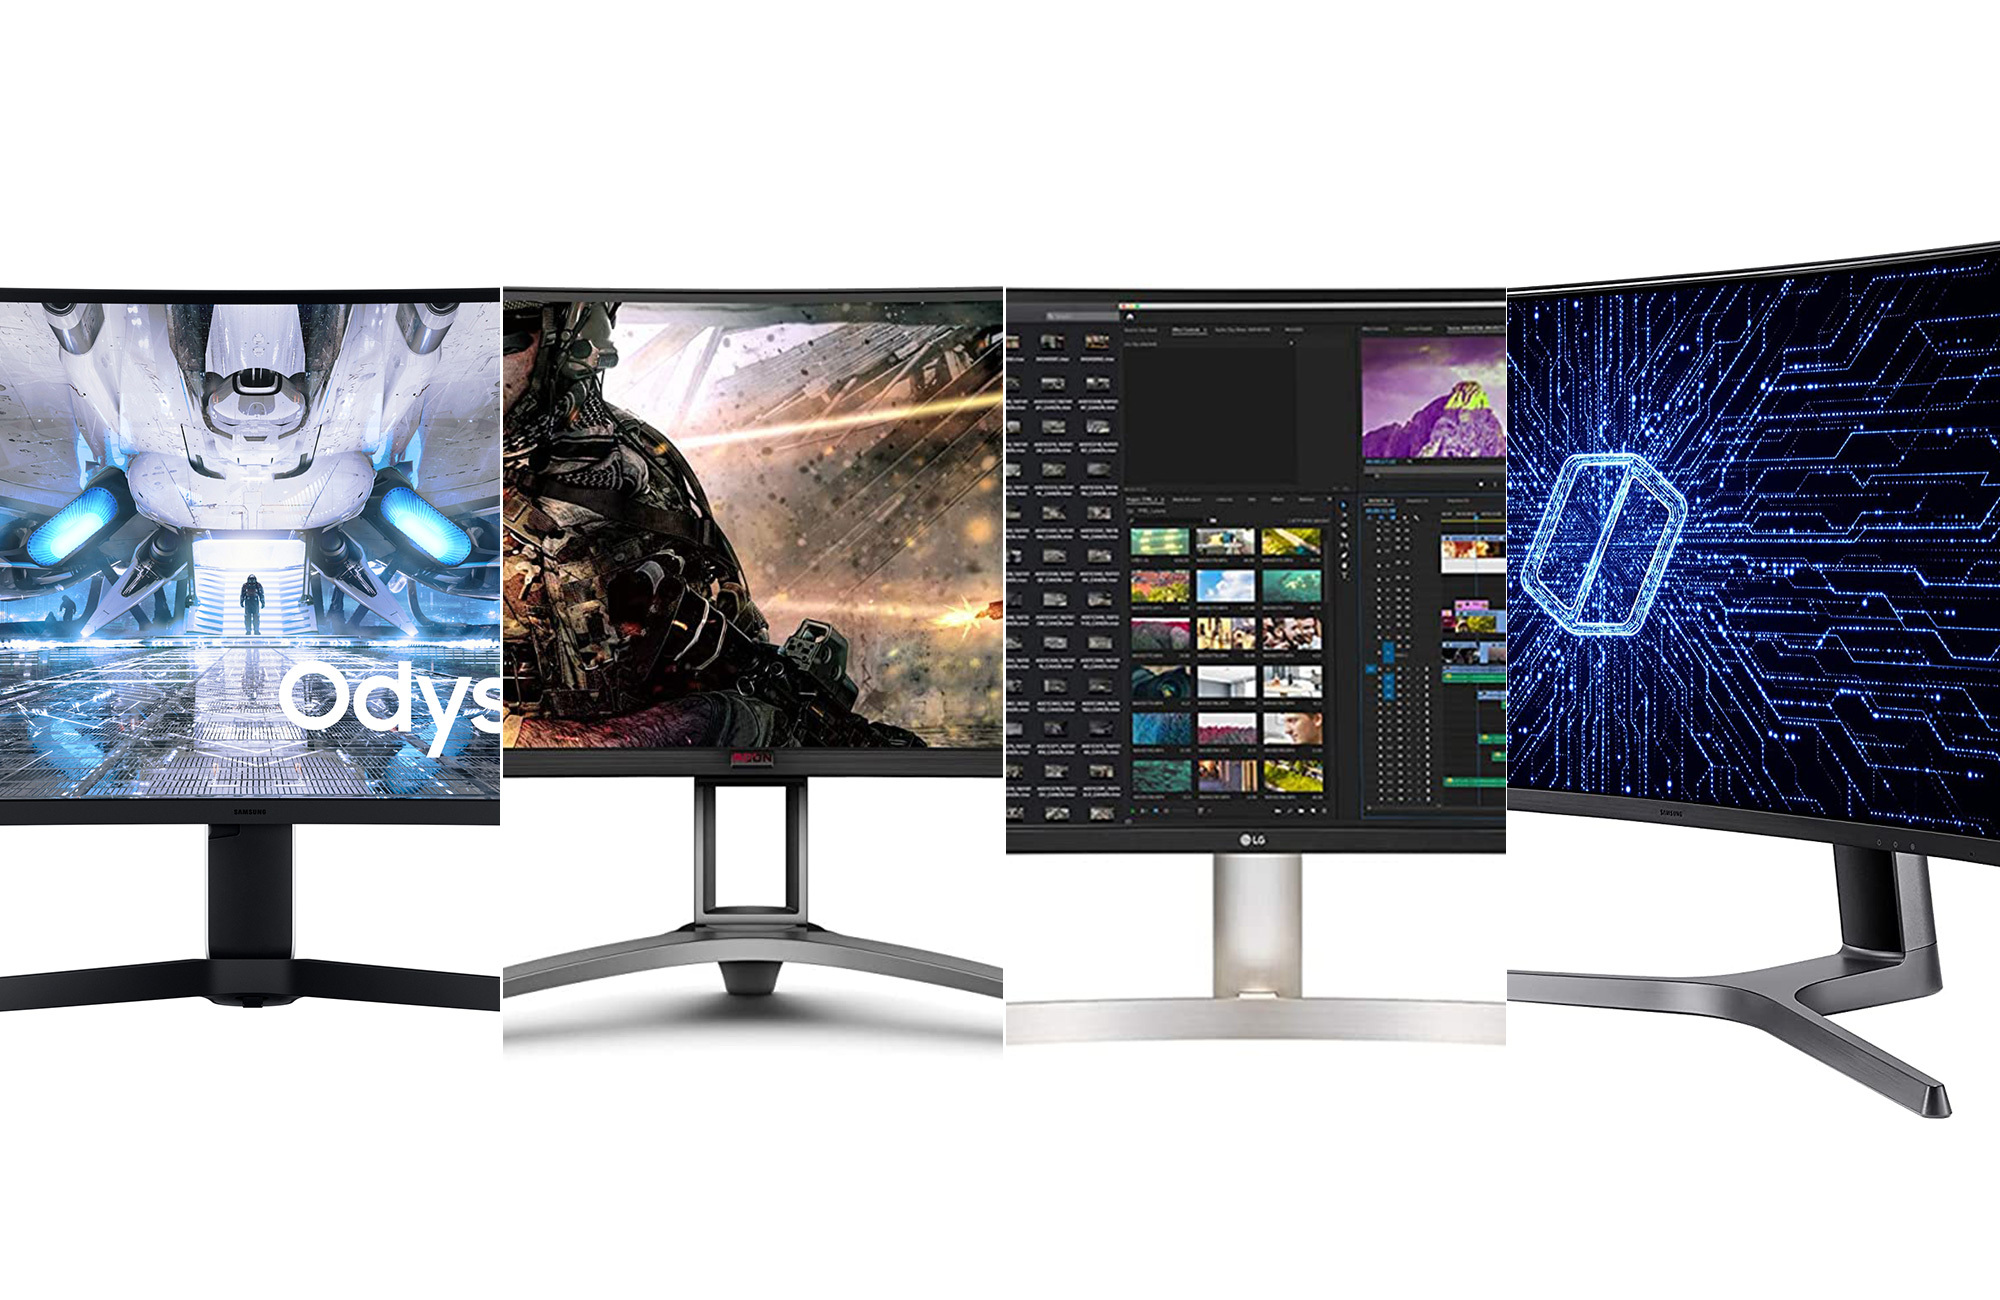 Benefits of ultrawide monitors in the workplace